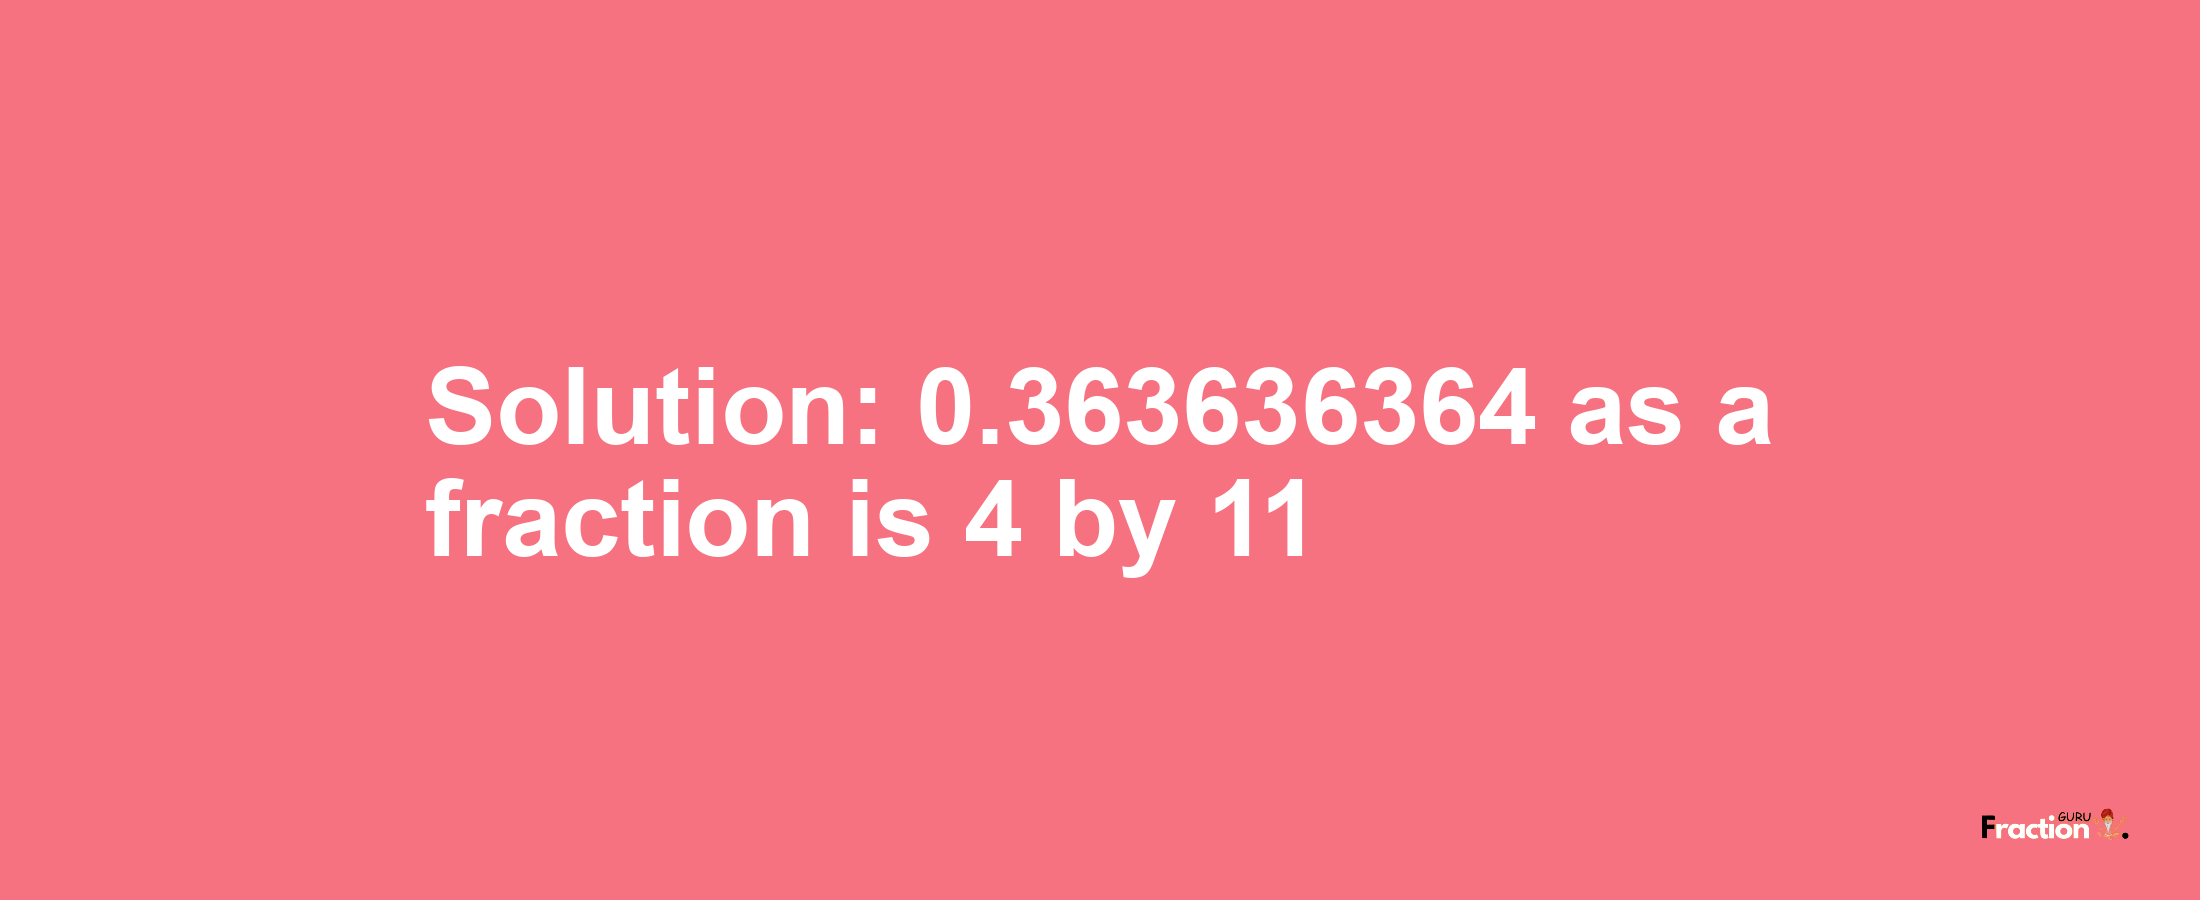 Solution:0.363636364 as a fraction is 4/11